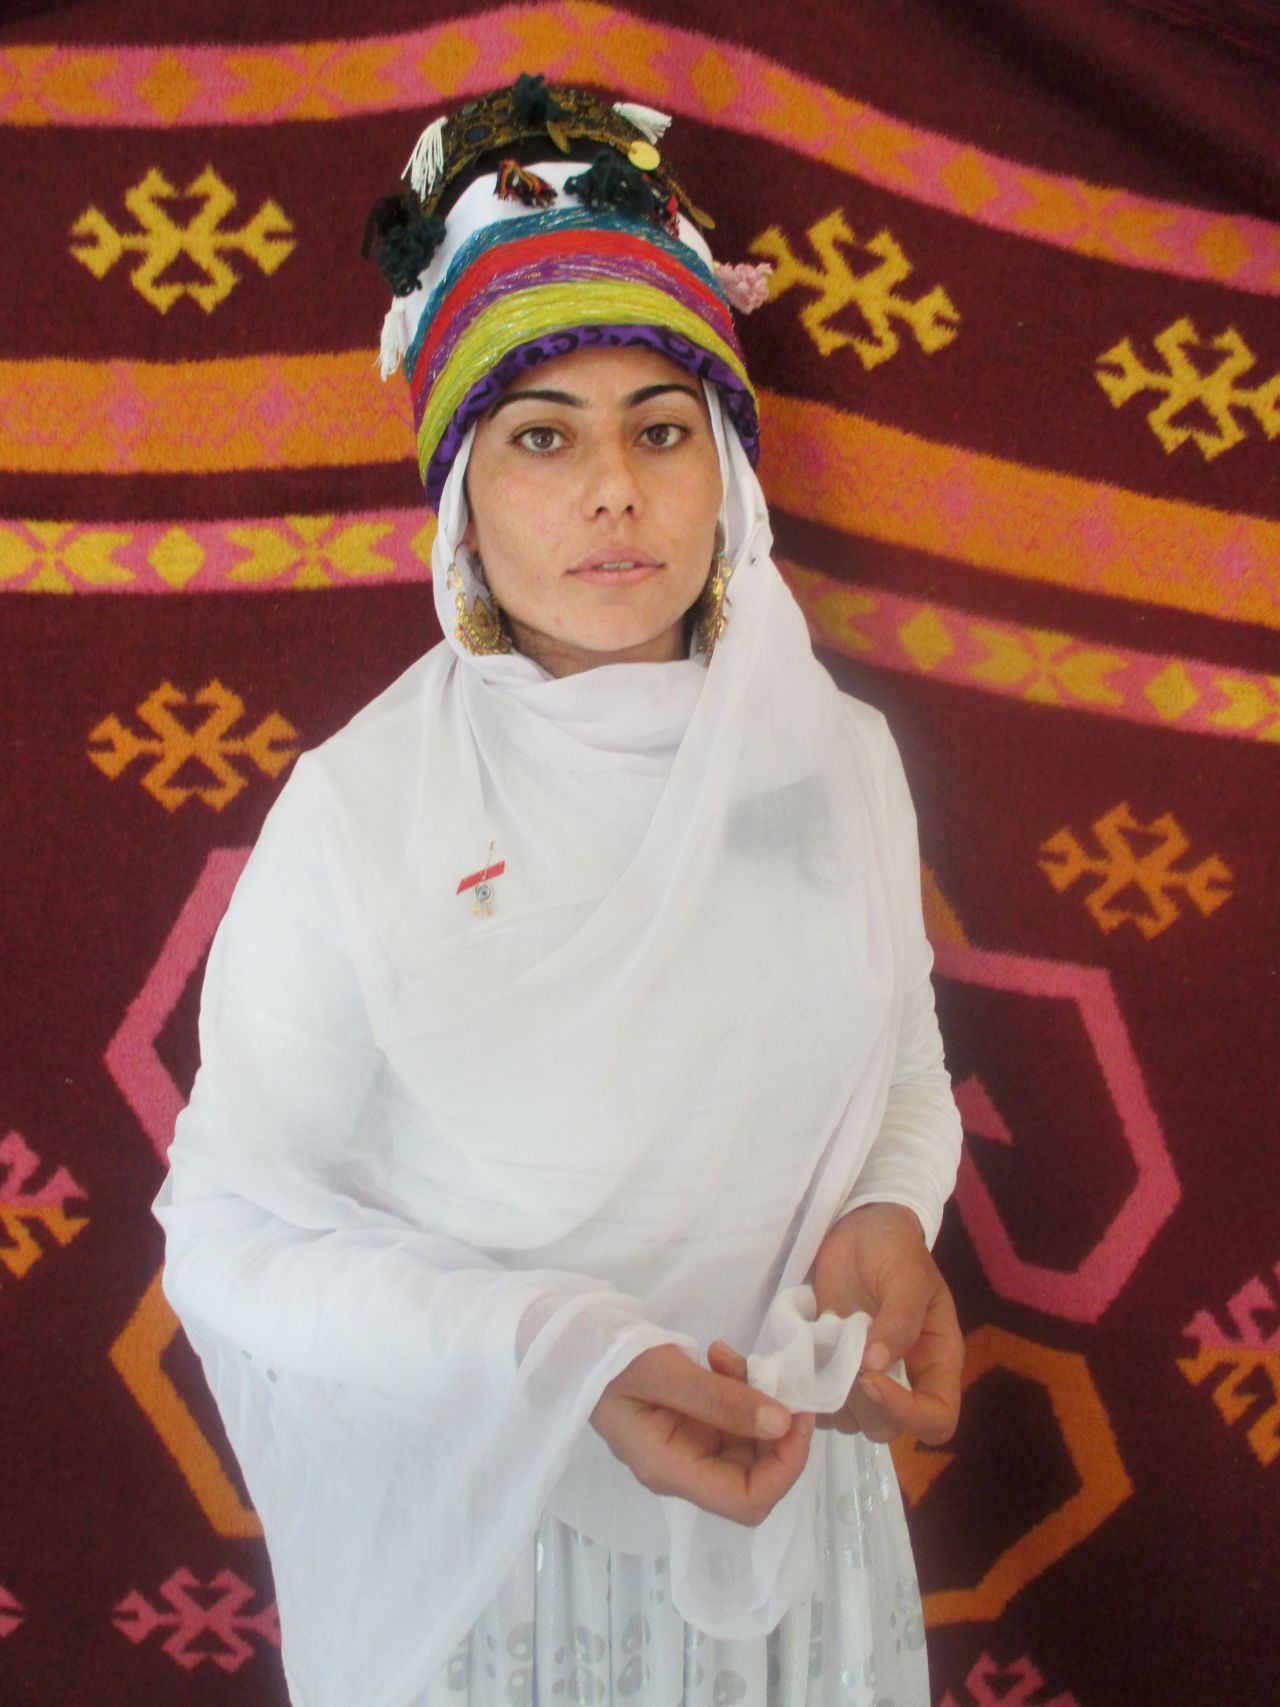 18-year-old Barfi's photography project focused on traditional Yazidi dress. She took portraits of friends and relatives against colorful backdrops in her camp. This is her sister wearing celebratory clothing. 